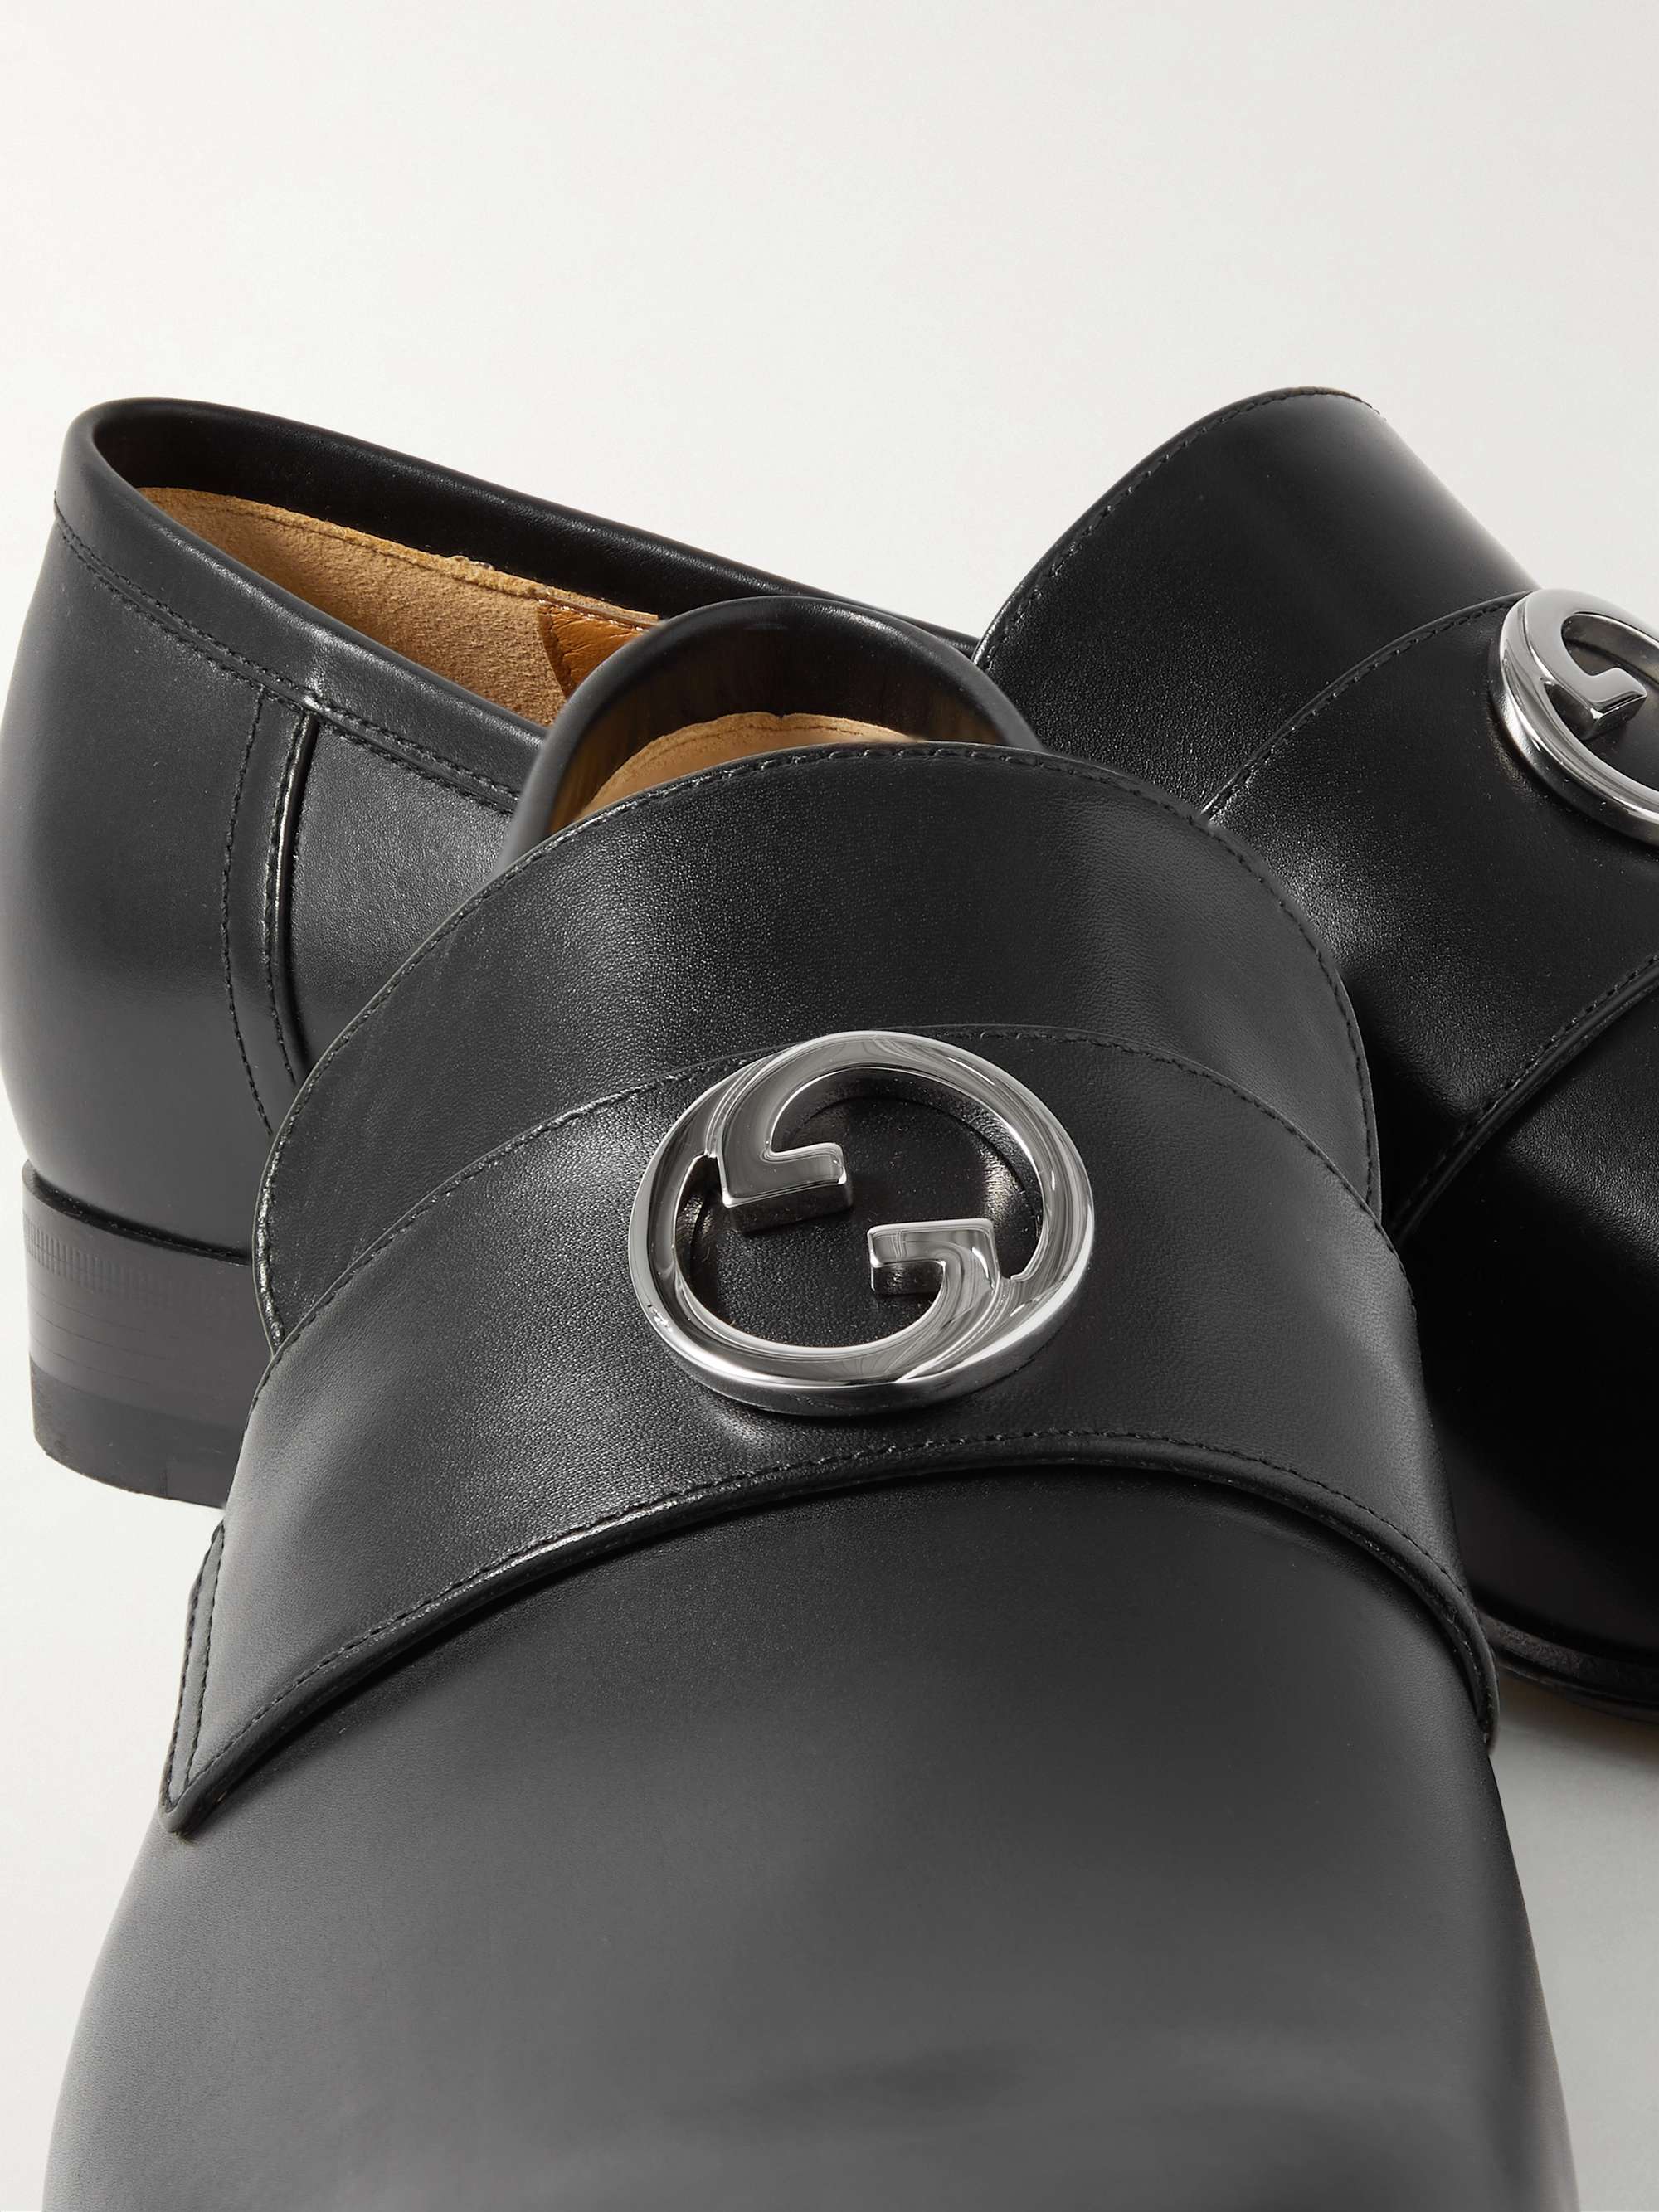 GUCCI Logo-Detailed Leather Loafers